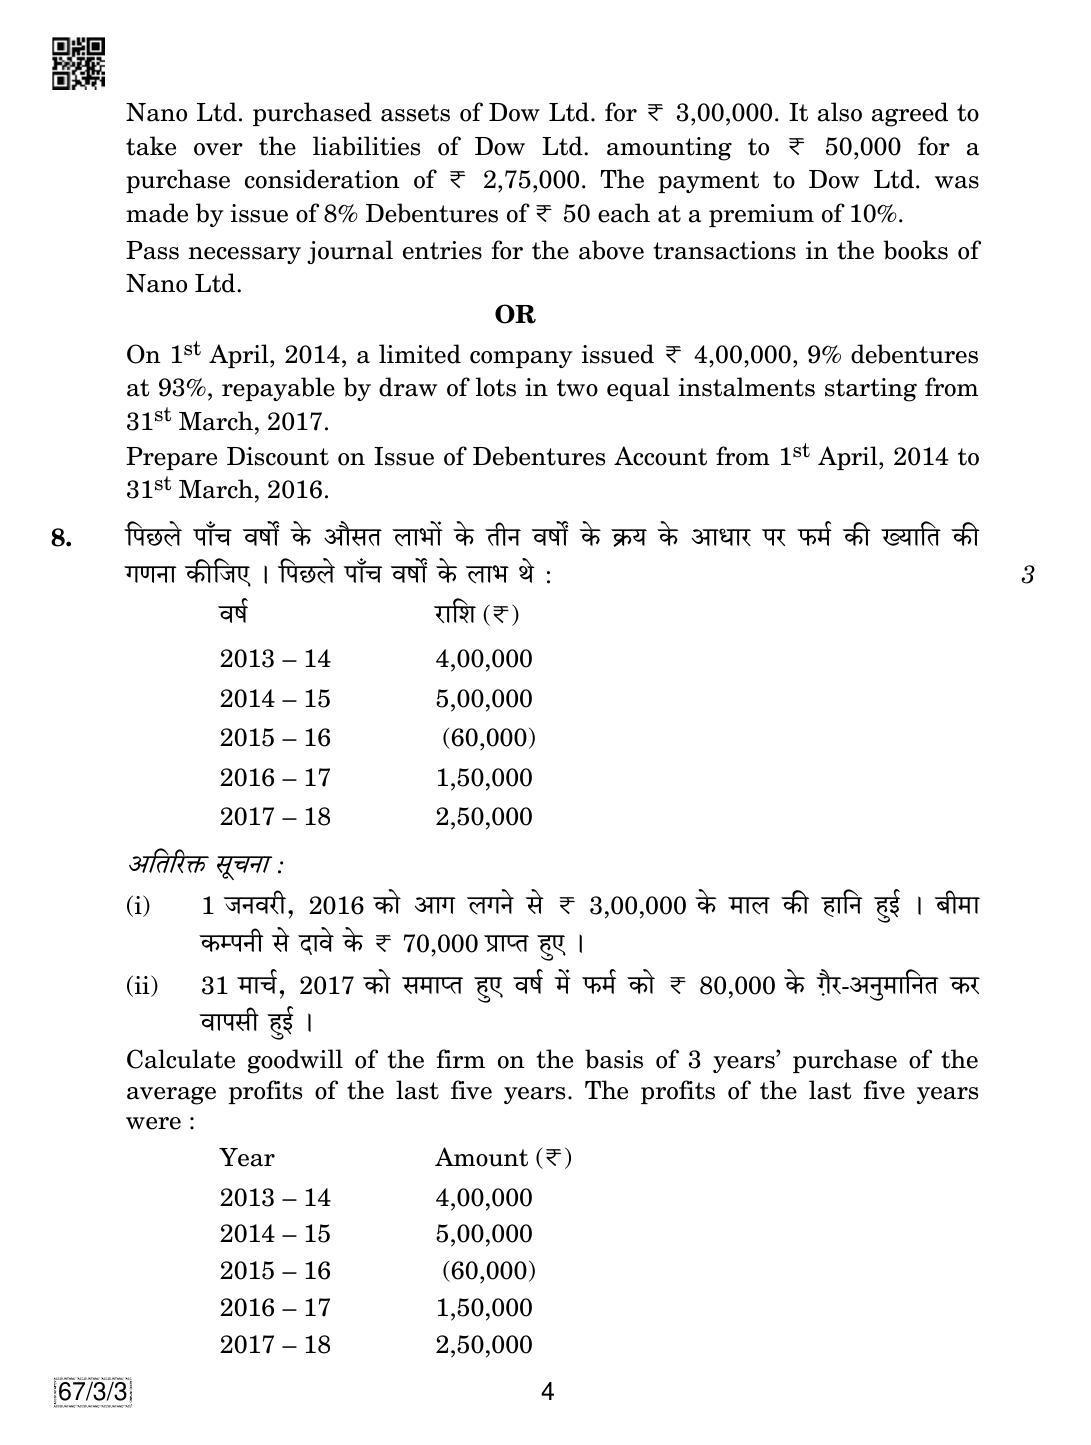 CBSE Class 12 67-3-3 Accountancy 2019 Question Paper - Page 4